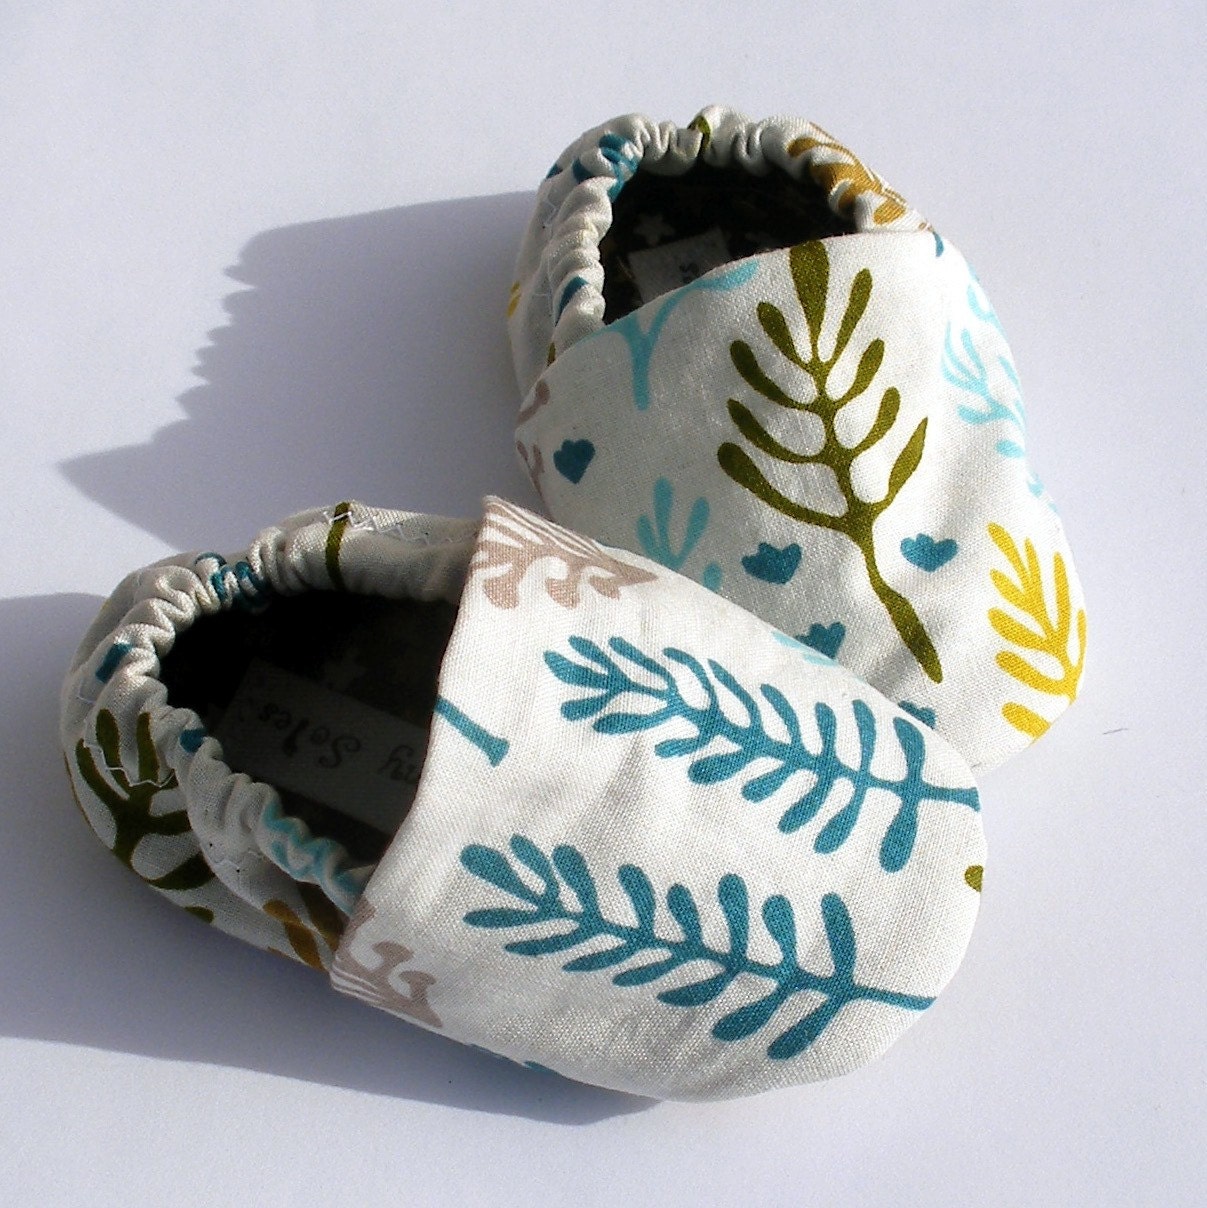 Handmade Organic Baby Shoes in Cloud 9 Clearing print- Size 0 3 6 9 12 18 months